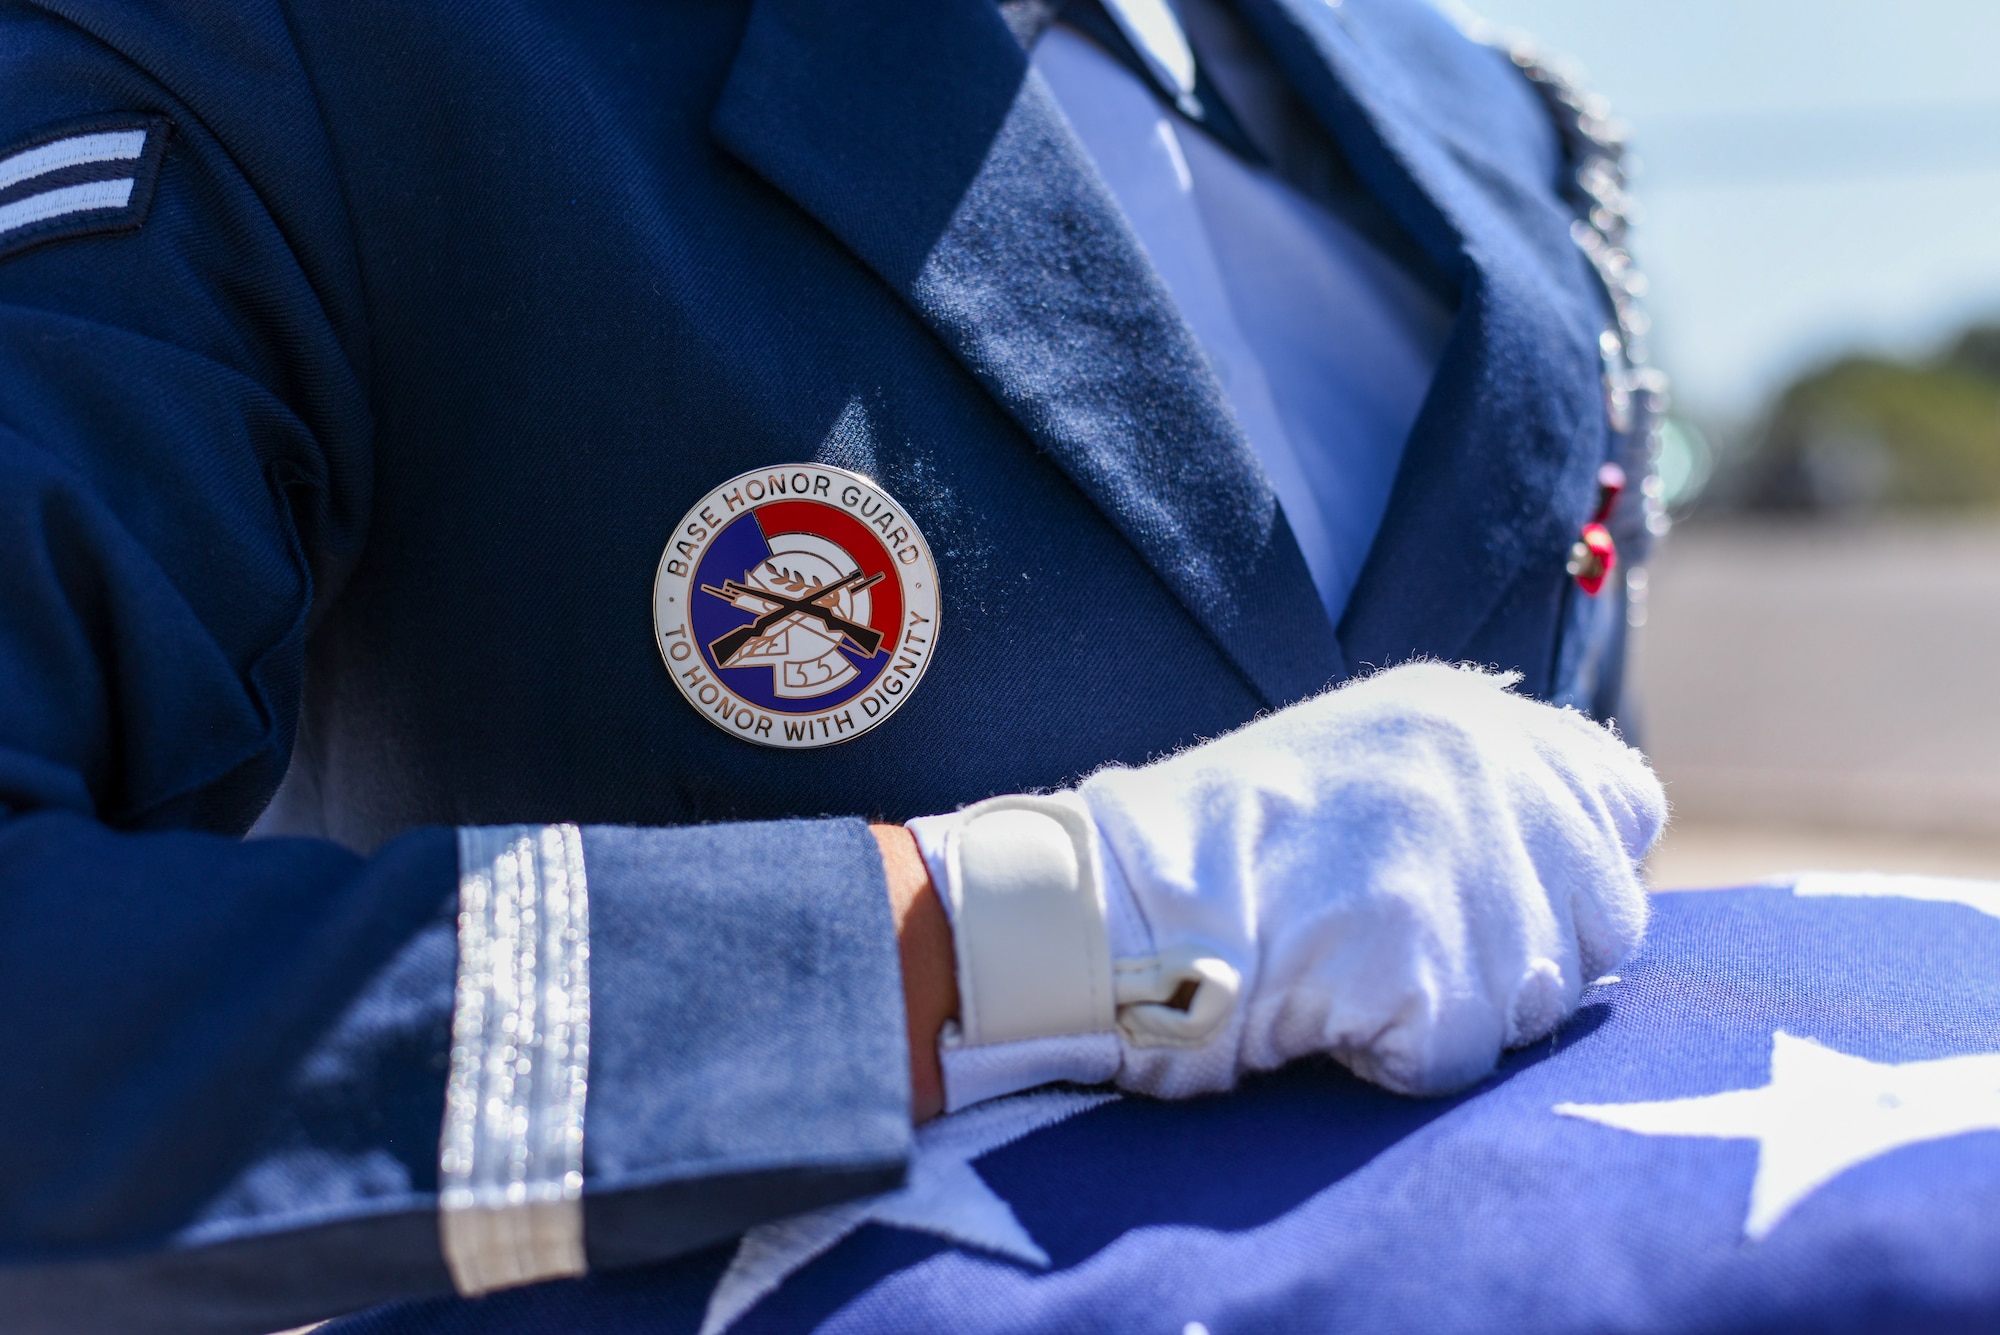 U.S. Air Force Airman 1st Class Mya Porras, 56th Fighter Wing ceremonial guardsman, holds the American flag during a flag folding ceremony July 28, 2021, at Luke Air Force Base, Arizona. The Luke AFB Honor Guard is responsible for a large amount of Arizona’s ceremonies, providing coverage to six different counties. The base honor guard’s primary mission is to provide military funeral honors for active-duty members as well as retirees and veterans who served honorably in the U.S. Air Force and Army Air Corps. (U.S. Air Force photo by Senior Airman Caleb F. Butler)